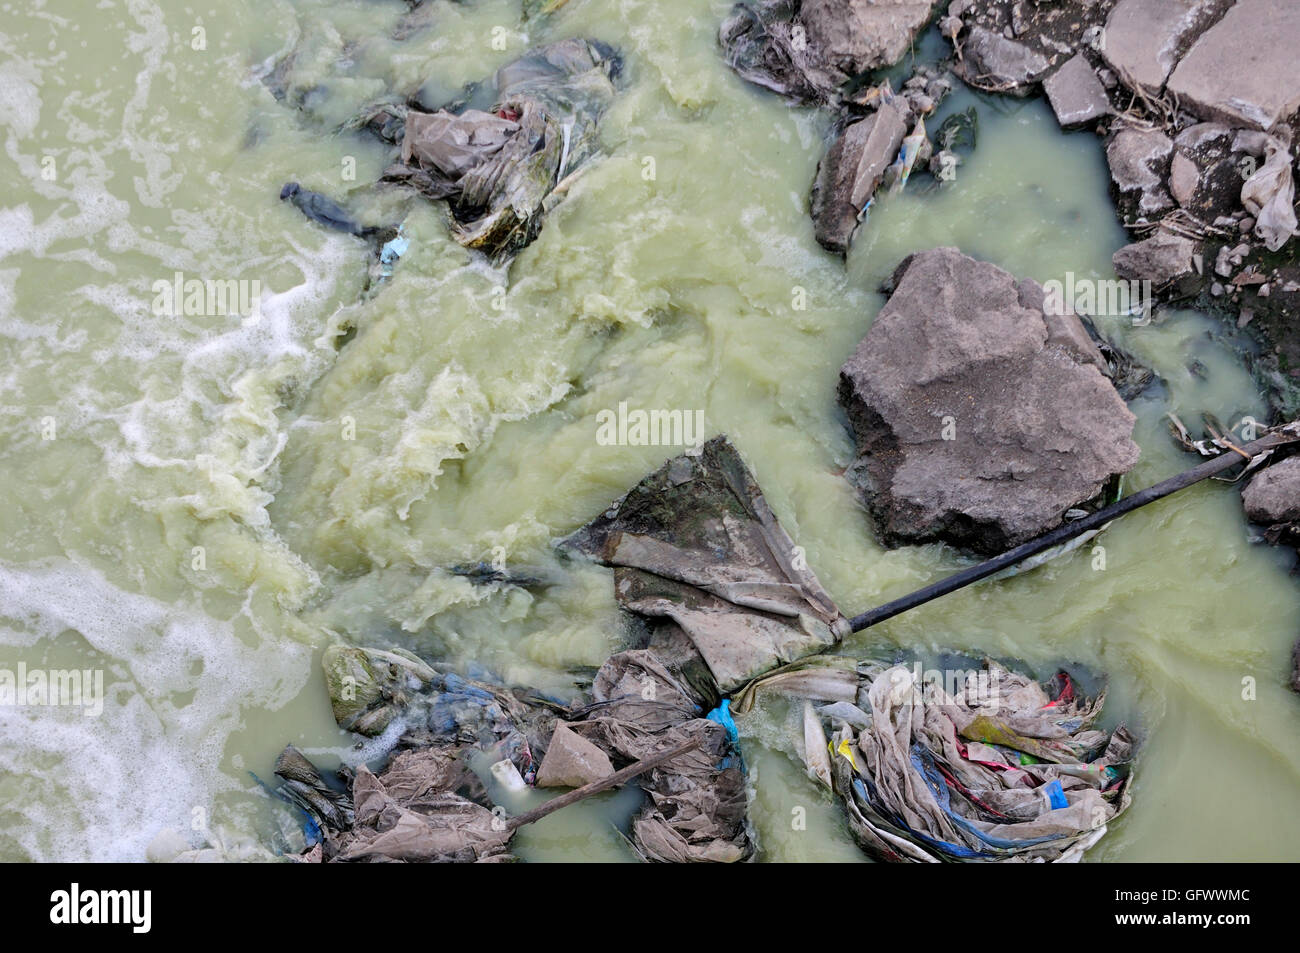 A water canal and run off area within Zhaodong China filled with trash creating polluted water in Heilongjiang province. Stock Photo